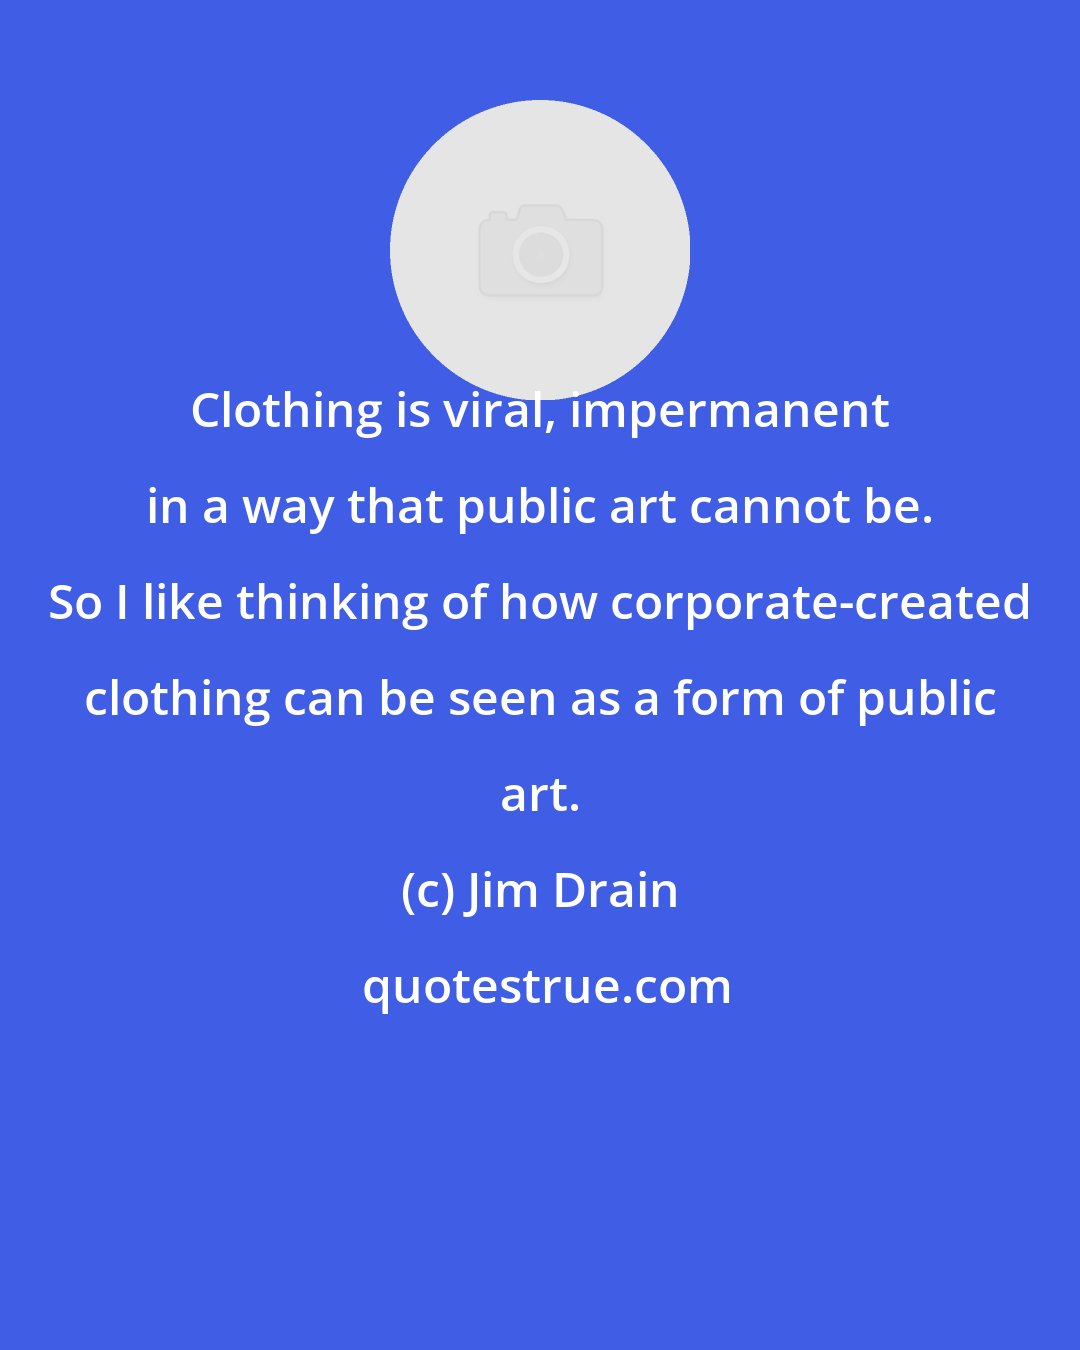 Jim Drain: Clothing is viral, impermanent in a way that public art cannot be. So I like thinking of how corporate-created clothing can be seen as a form of public art.